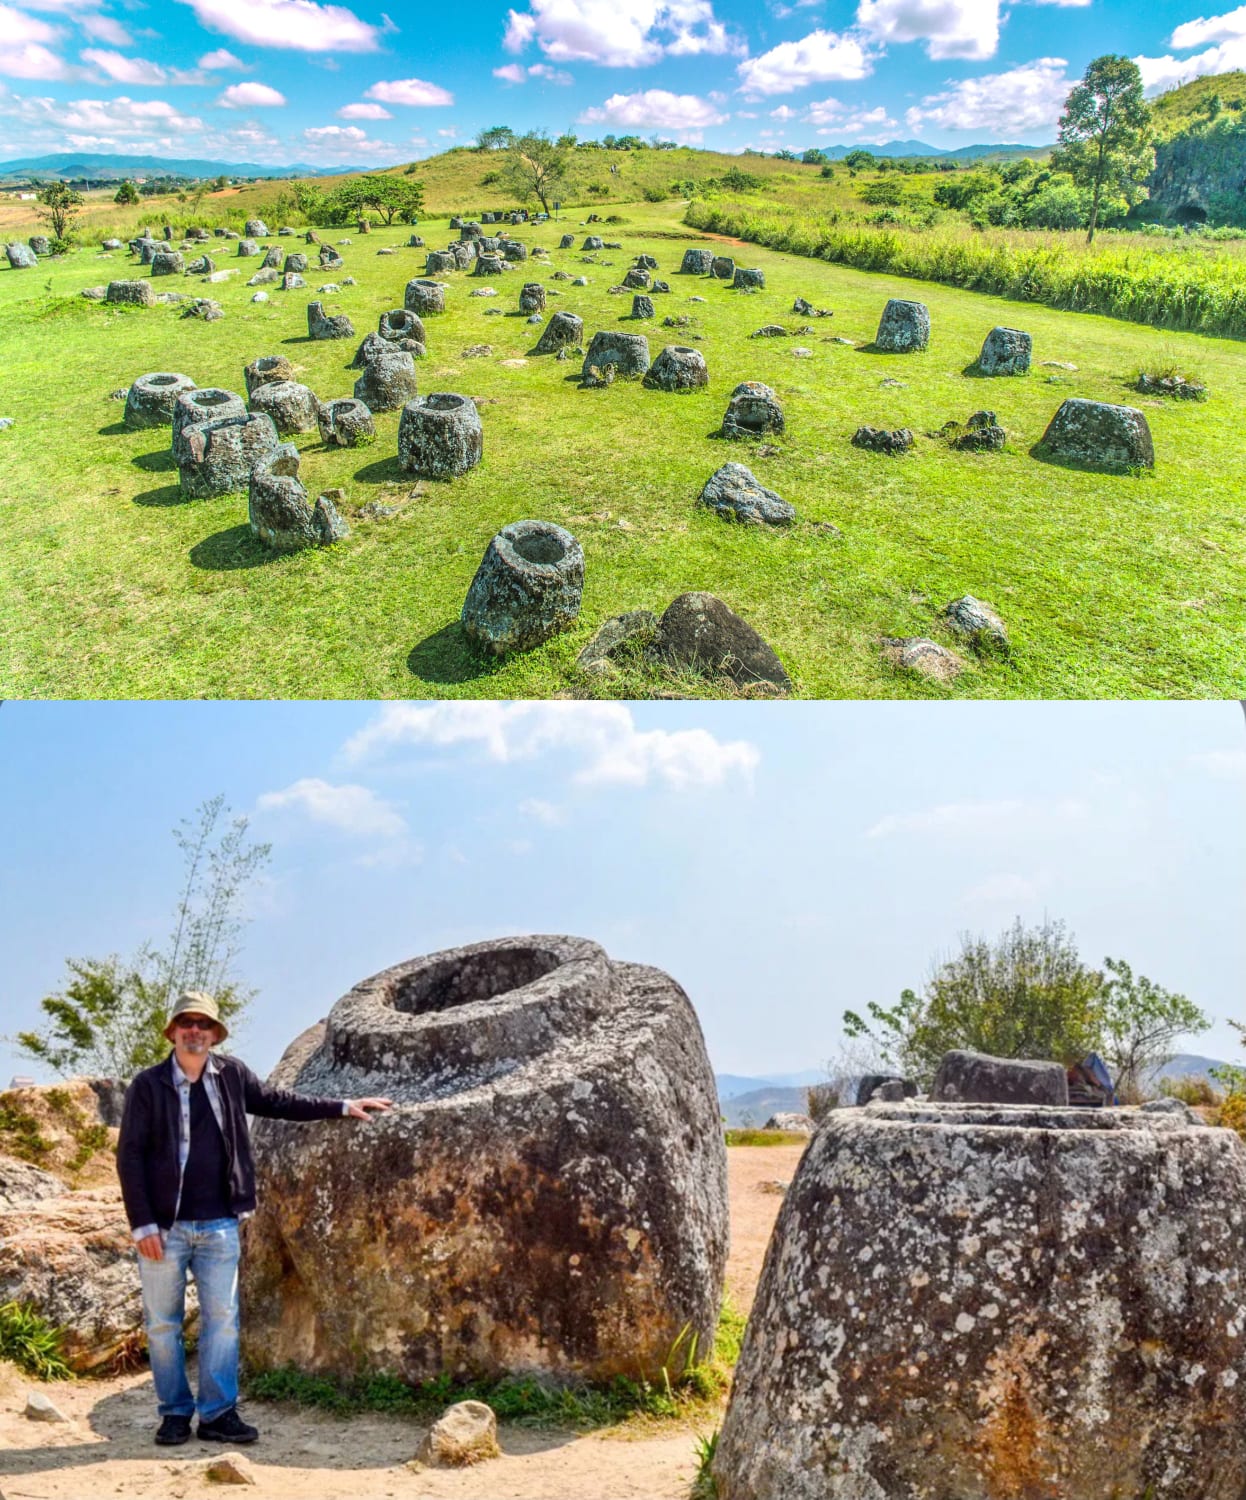 The Plain of Jars, located in central Laos, gets its name from more than 2100 tubular-shaped megalithic stone jars used for funerary practices in the iron age. Researchers, using optically stimulated luminescence, determined that the jars were put in place as early as 1240 to 660 BC